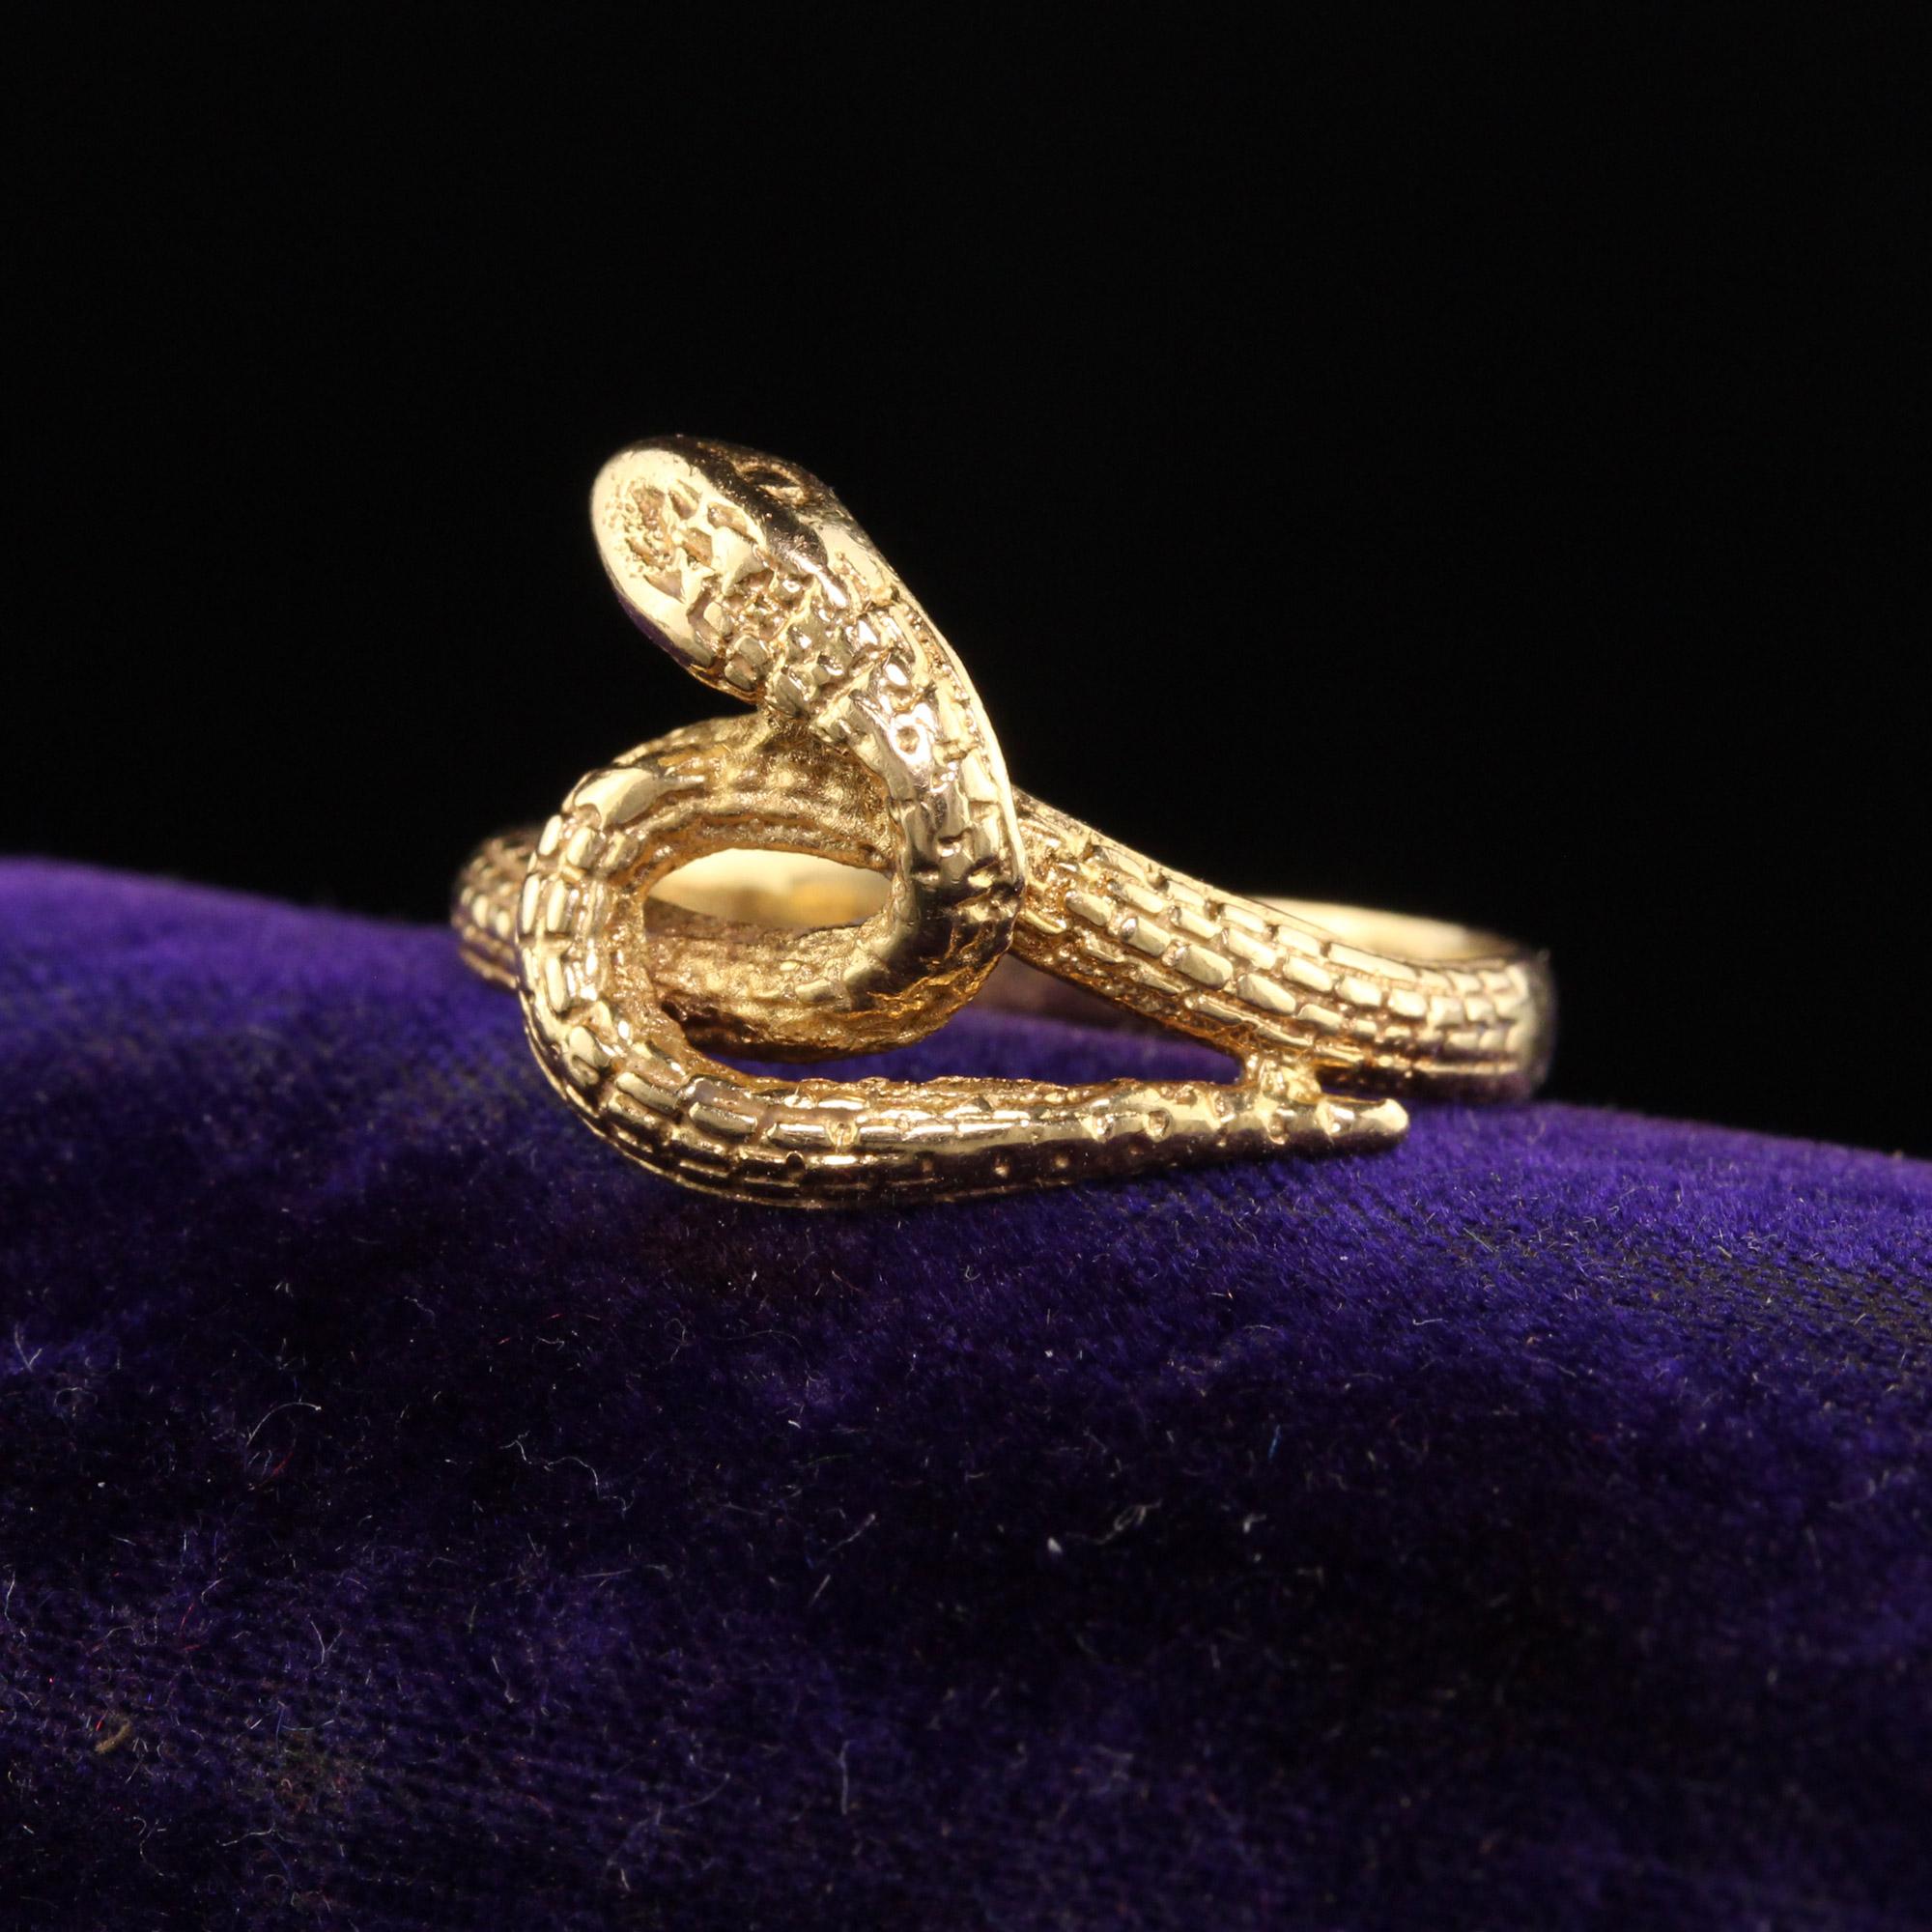 Beautiful Antique Victorian 19K Yellow Gold Engraved Snake Ring. This beautiful snake ring is crafted in 19k yellow gold and has hallmarks on the outside of the shank. It is in great condition and the scale engravings are nice a visible.

Item